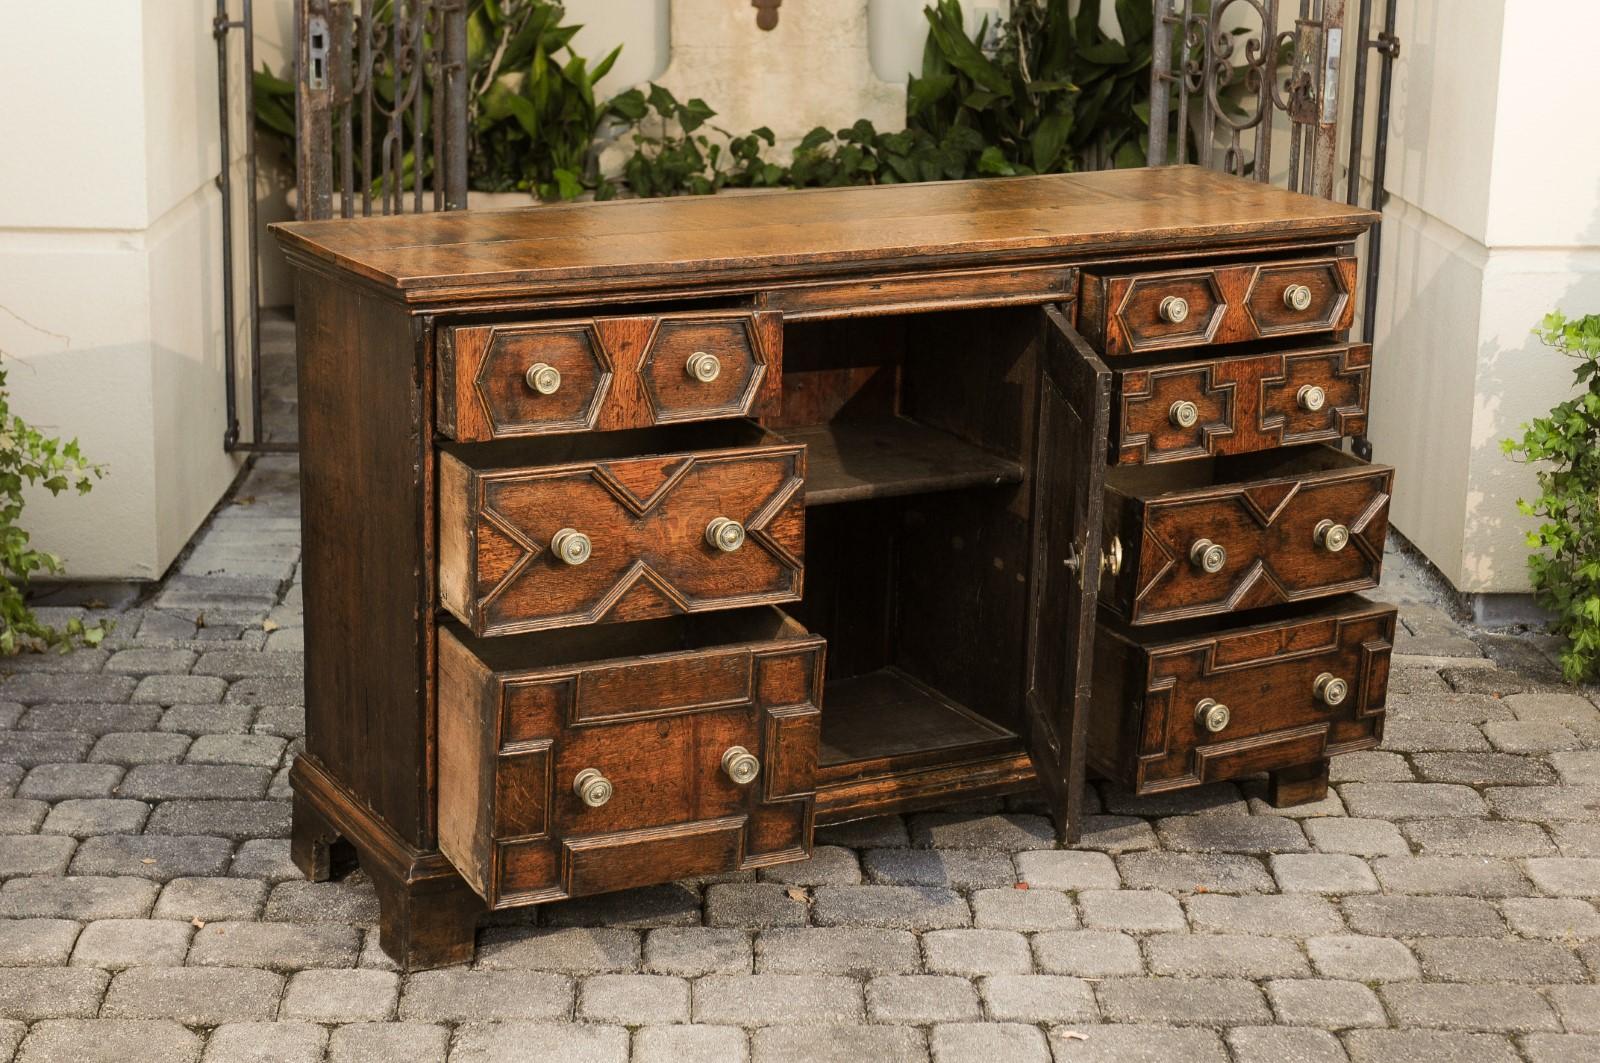 An English Georgian period geometric front oak buffet from the early 19th century, with single door and seven drawers. Born in England during the reign of King George III, this exquisite oak buffet features a rectangular planked top sitting above a